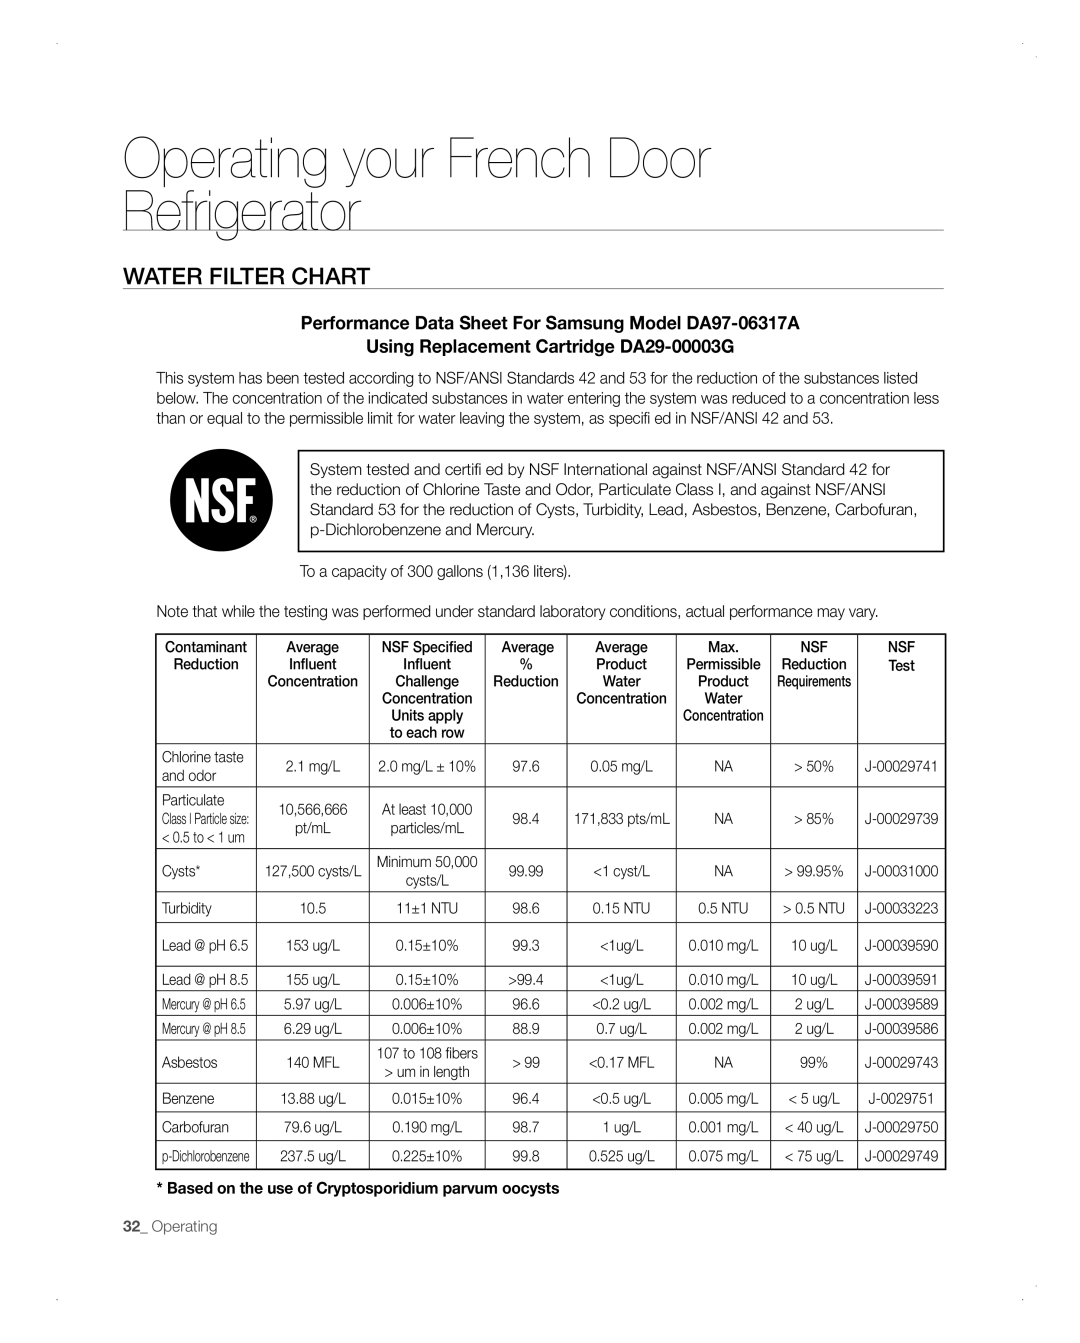 Samsung RFG298AARS Water Filter Chart, Operating your French Door Refrigerator, Using Replacement Cartridge DA29-00003G 